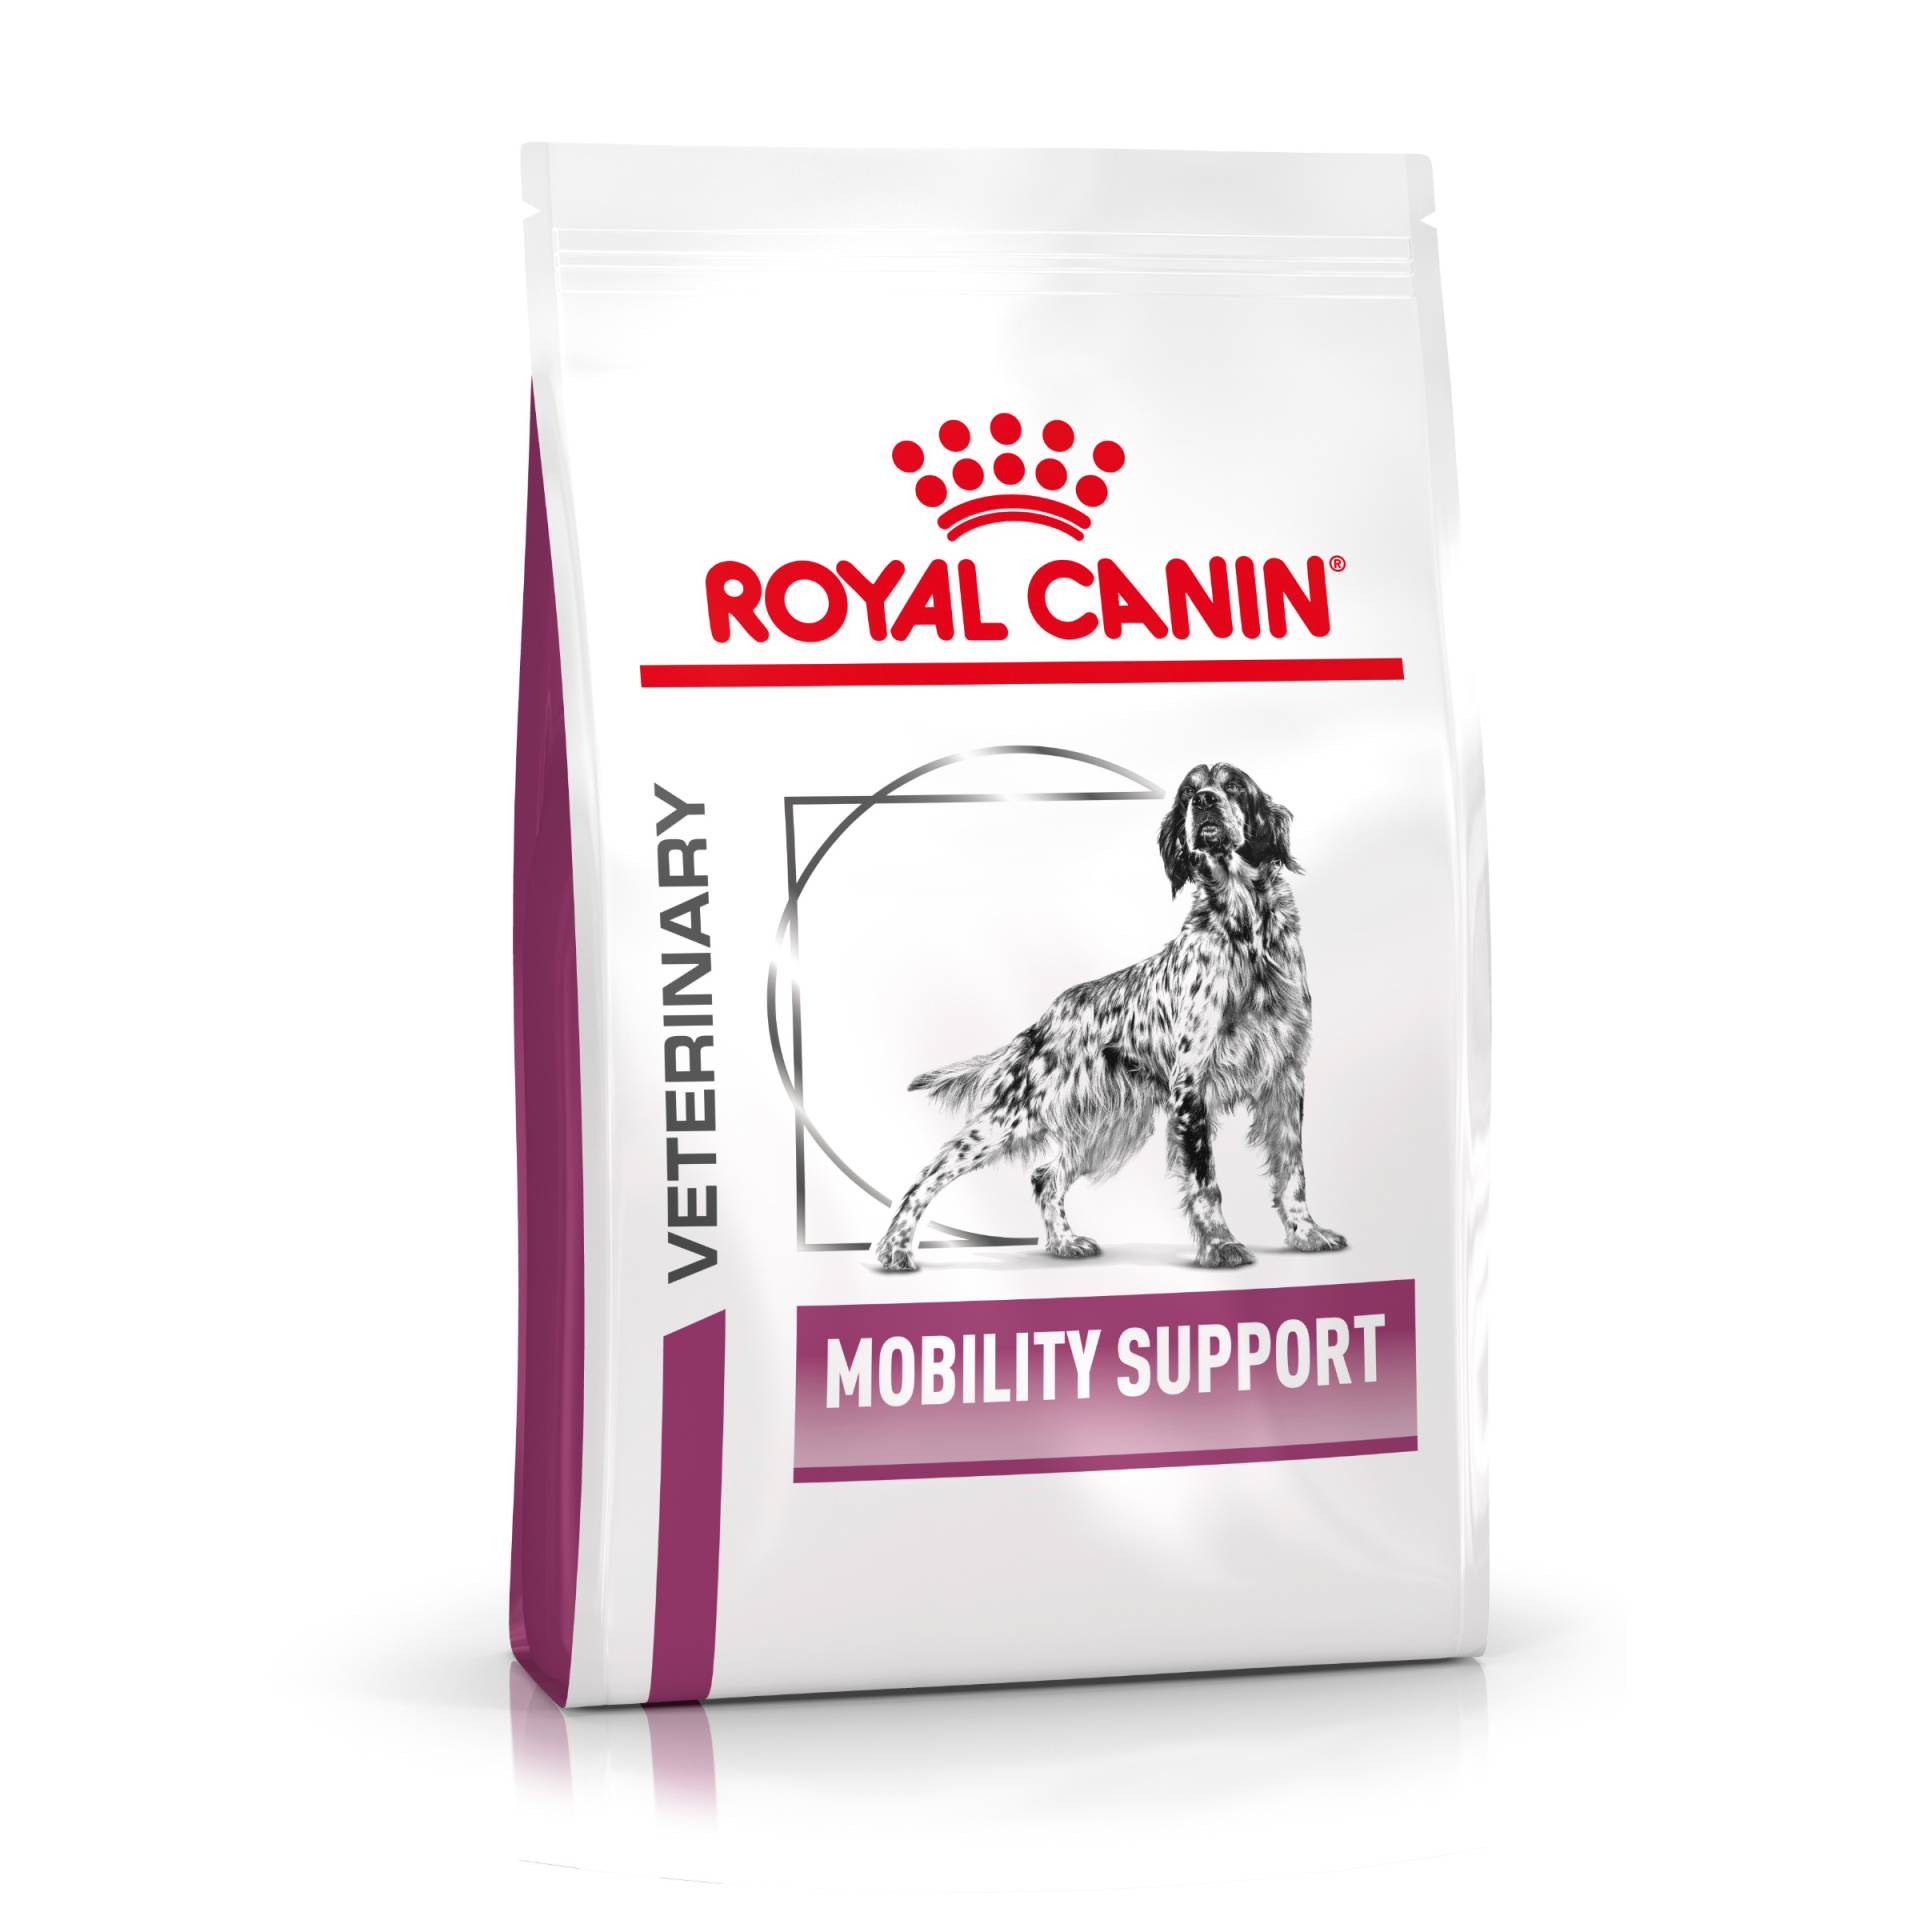 Royal Canin Veterinary Canine Mobility Support - Sparpaket: 2 x 12 kg von Royal Canin Veterinary Diet